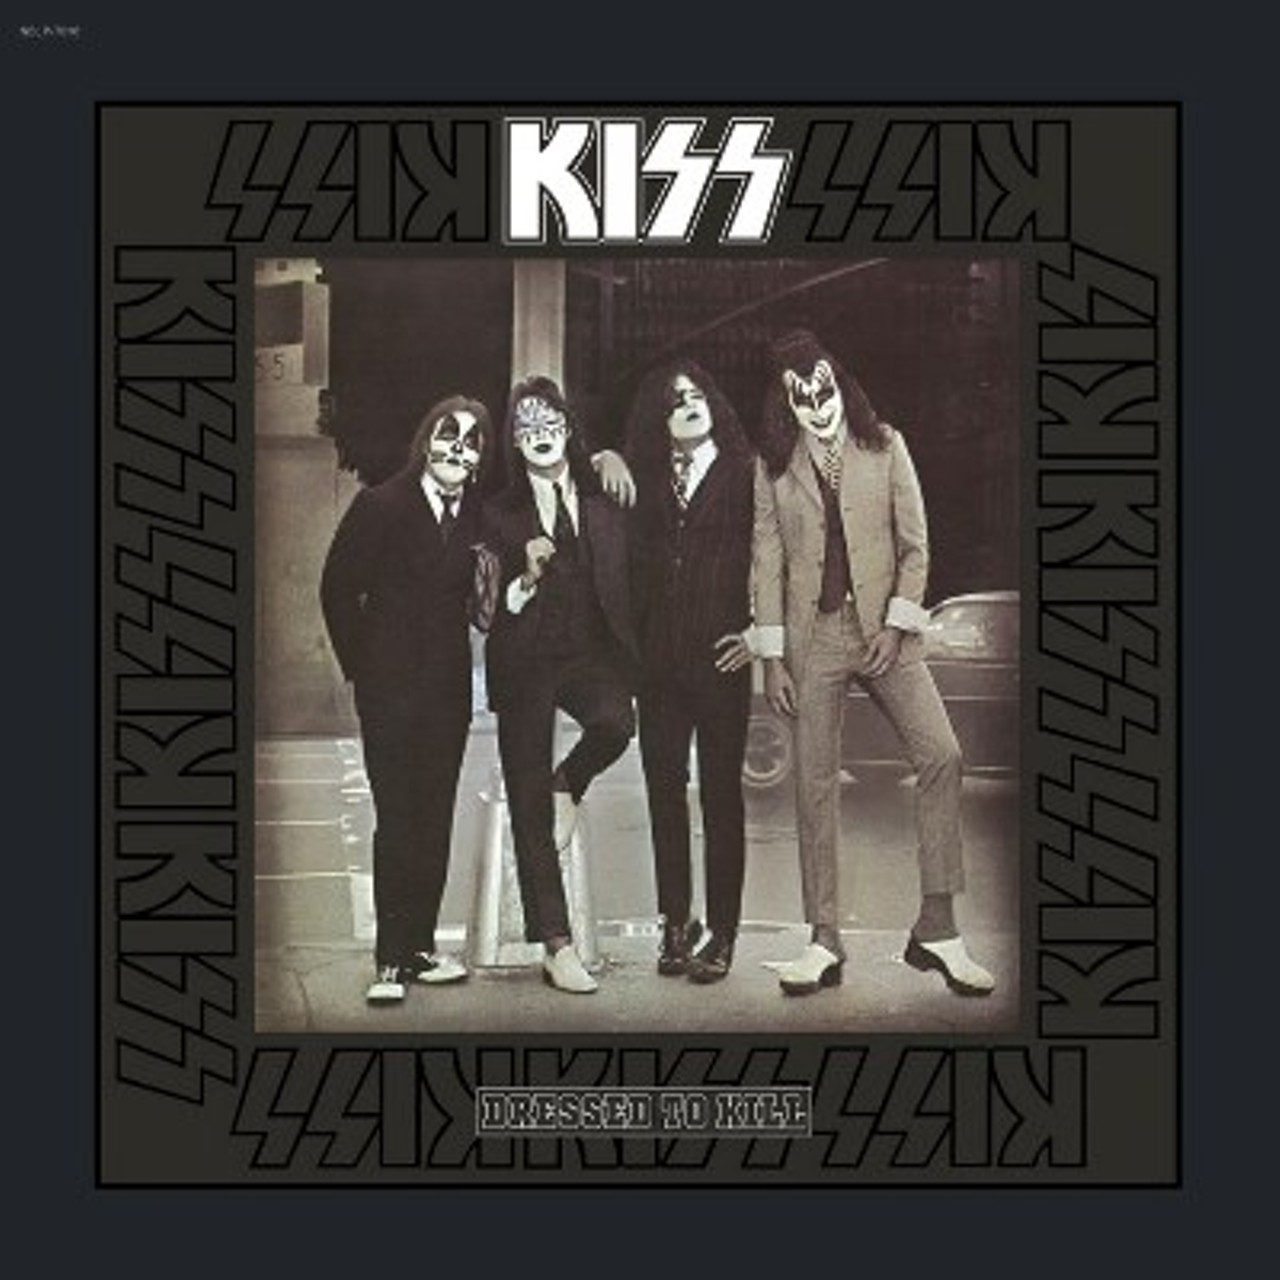 Dressed To Kill sonically repeats the formula of the first two KISS records. The opening four tracks are somewhat forgettable. However, from the fifth song, “Rock Bottom,” to the rocking conclusion of “Rock And Roll All Nite,” you are in for a treat. This was the last album the band made before its breakthrough, Alive! Be sure not to miss out on the rock and roll dance party of killer tracks like “C’mon And Love Me” and “Love Her All I Can.”